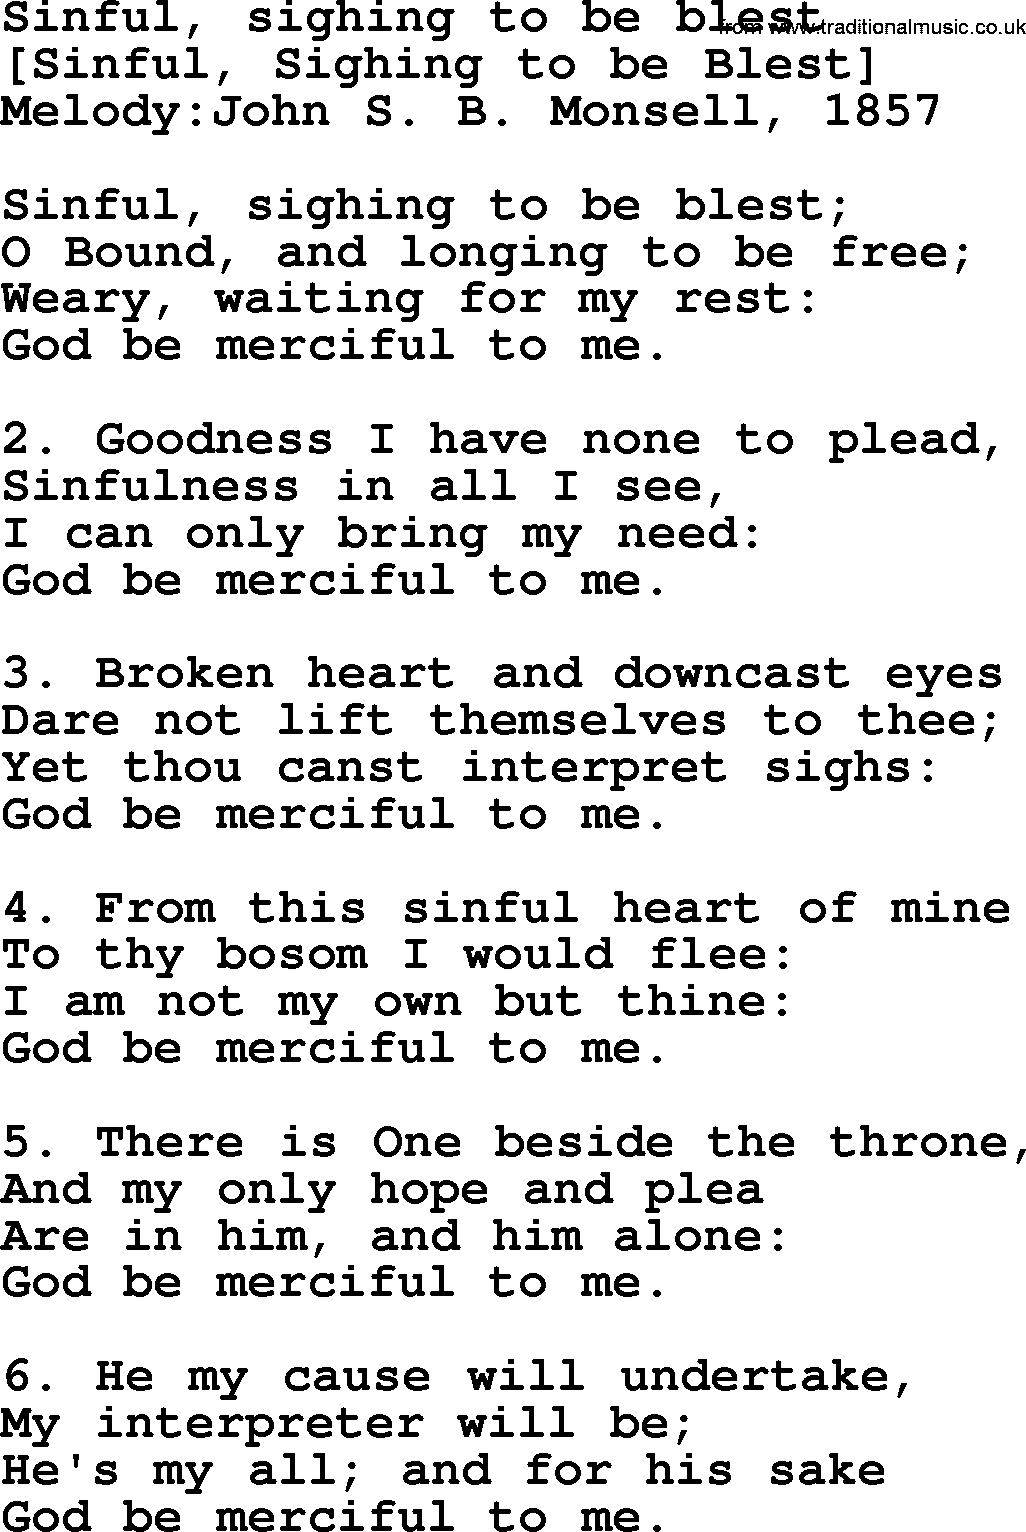 Old English Song: Sinful, Sighing To Be Blest lyrics